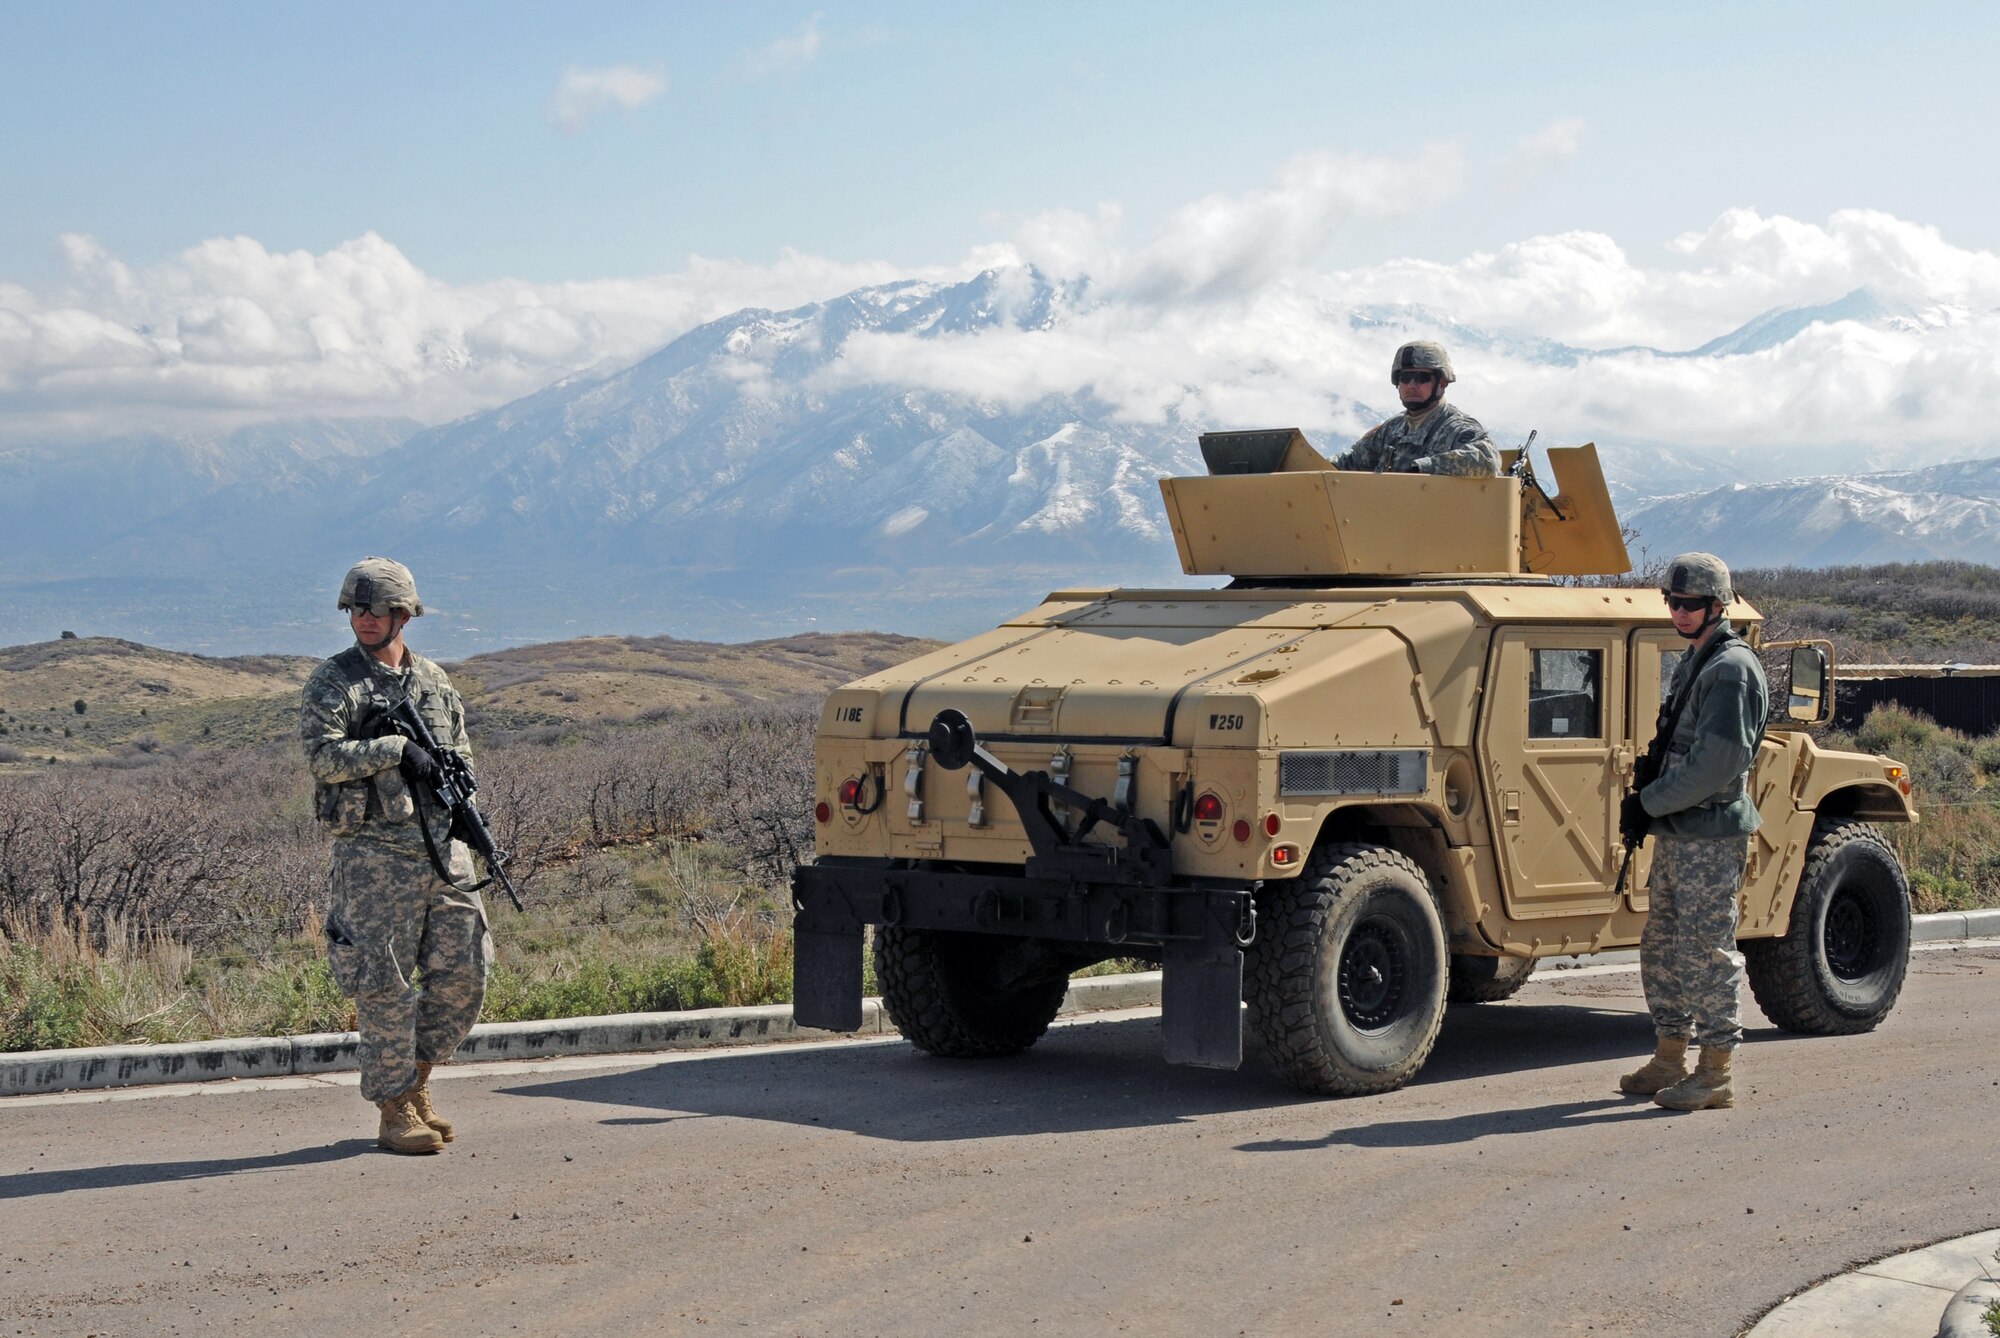 Members of the Army National Guard's 1457th Engineer Battalion participate in a training exercise conducted with explosive ordnance technicians from the Air National Guard's 151st Civil Engineering Squadron at the Improvised Explosive Device Training Lane at Camp Williams, Utah on April 9, 2015. The training scenario involved the removal of a simulated landmine, followed by a discussion with Moroccan State Partners. (Air National Guard photo by Staff Sgt. Annie Edwards/RELEASED)